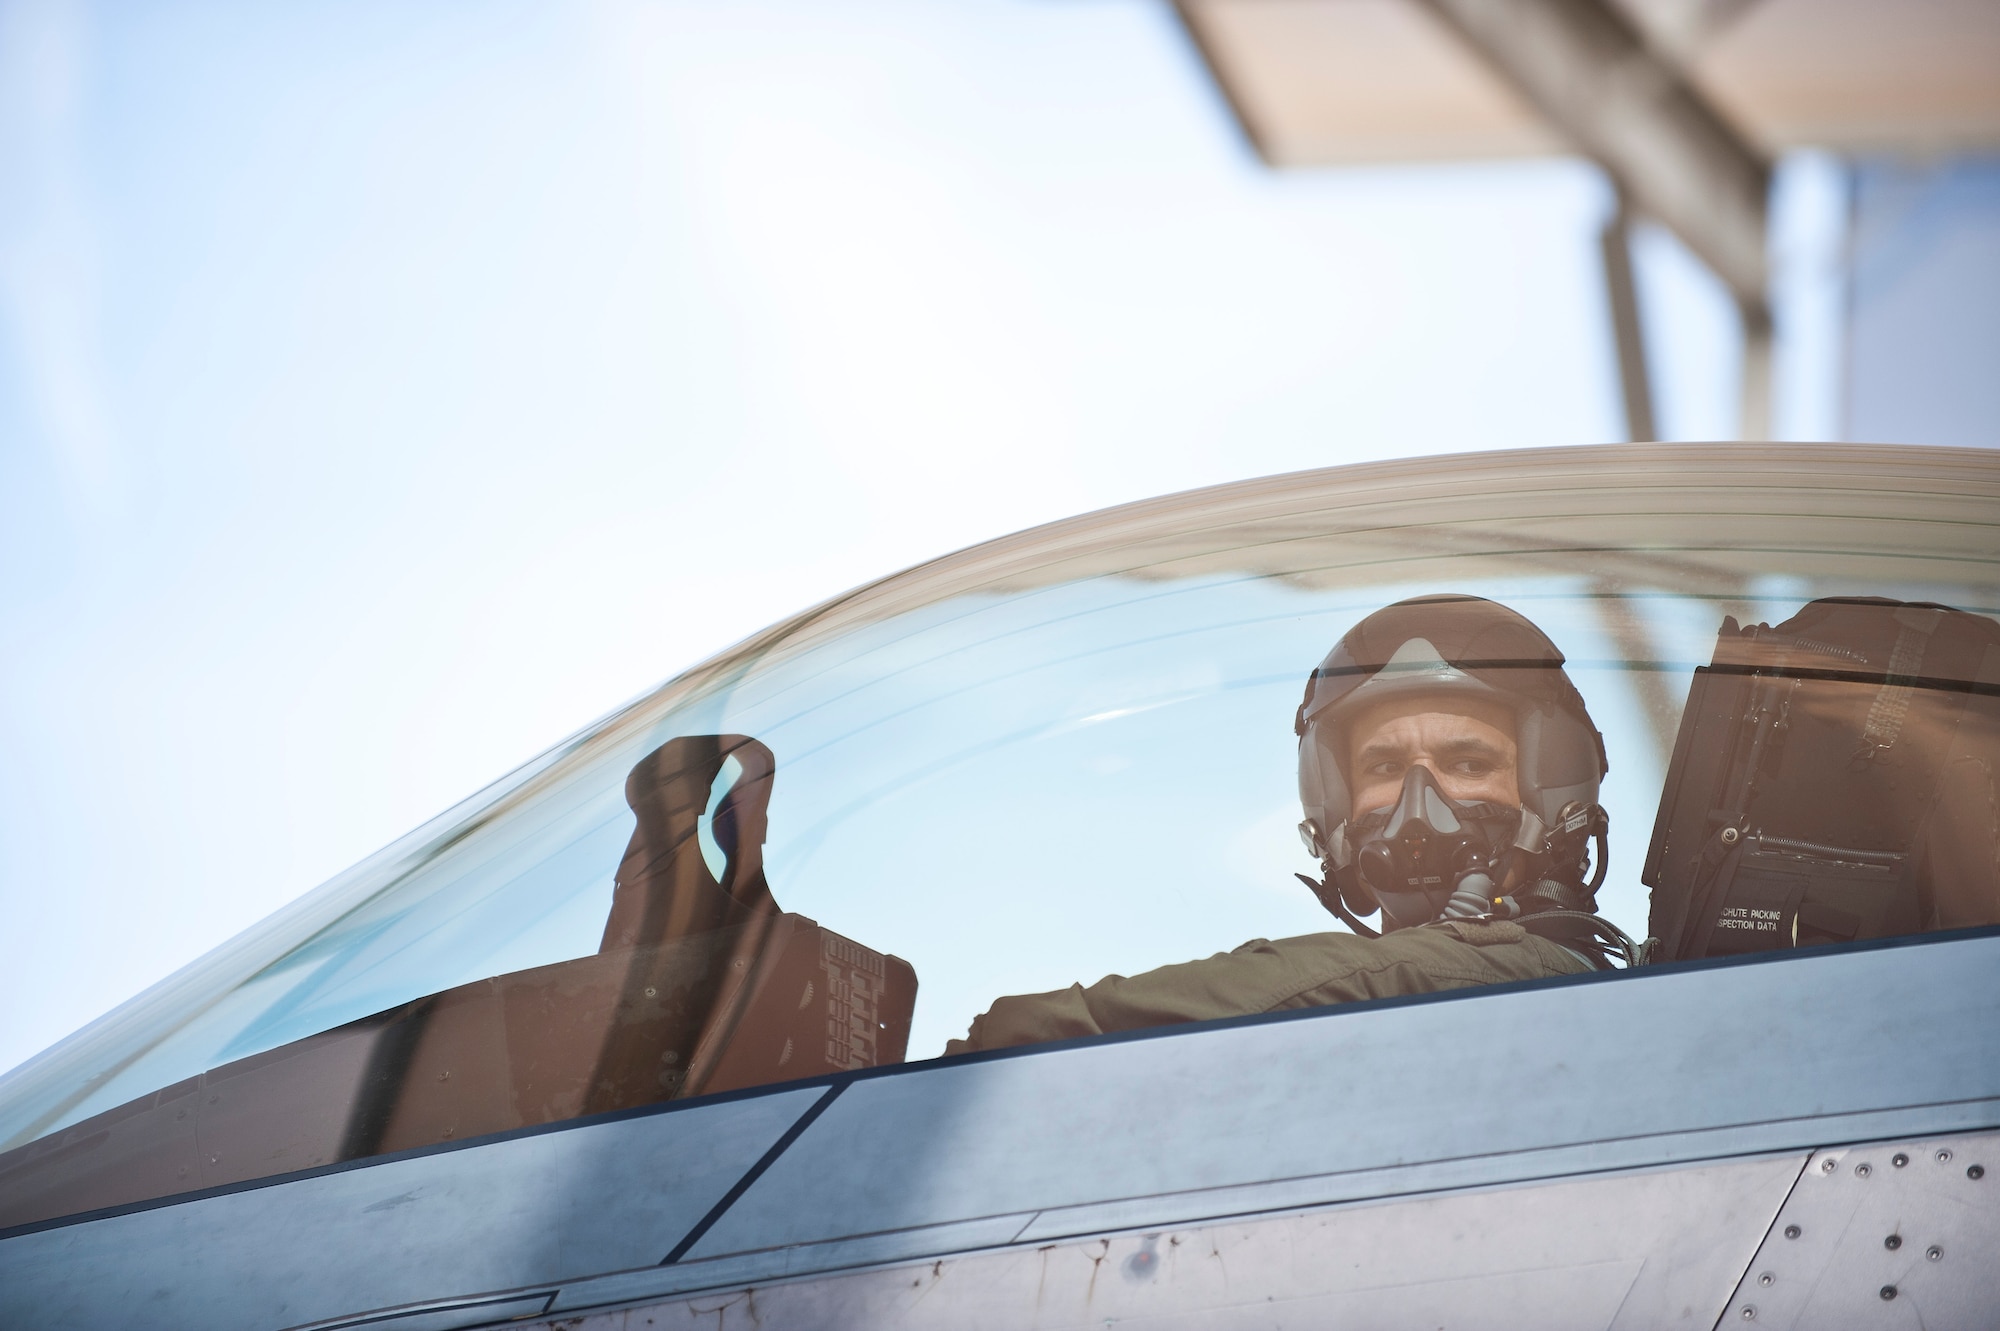 Col. Adrian Spain, U.S. Air Force Weapons School commandant, preps for his final flight as the USAFWS commandant at Nellis Air Force Base, Nev., May 11, 2015. Spain has served as the commandant of the USAFWS since June 2013. (U.S. Air Force photo by Staff Sgt. Siuta B. Ika)